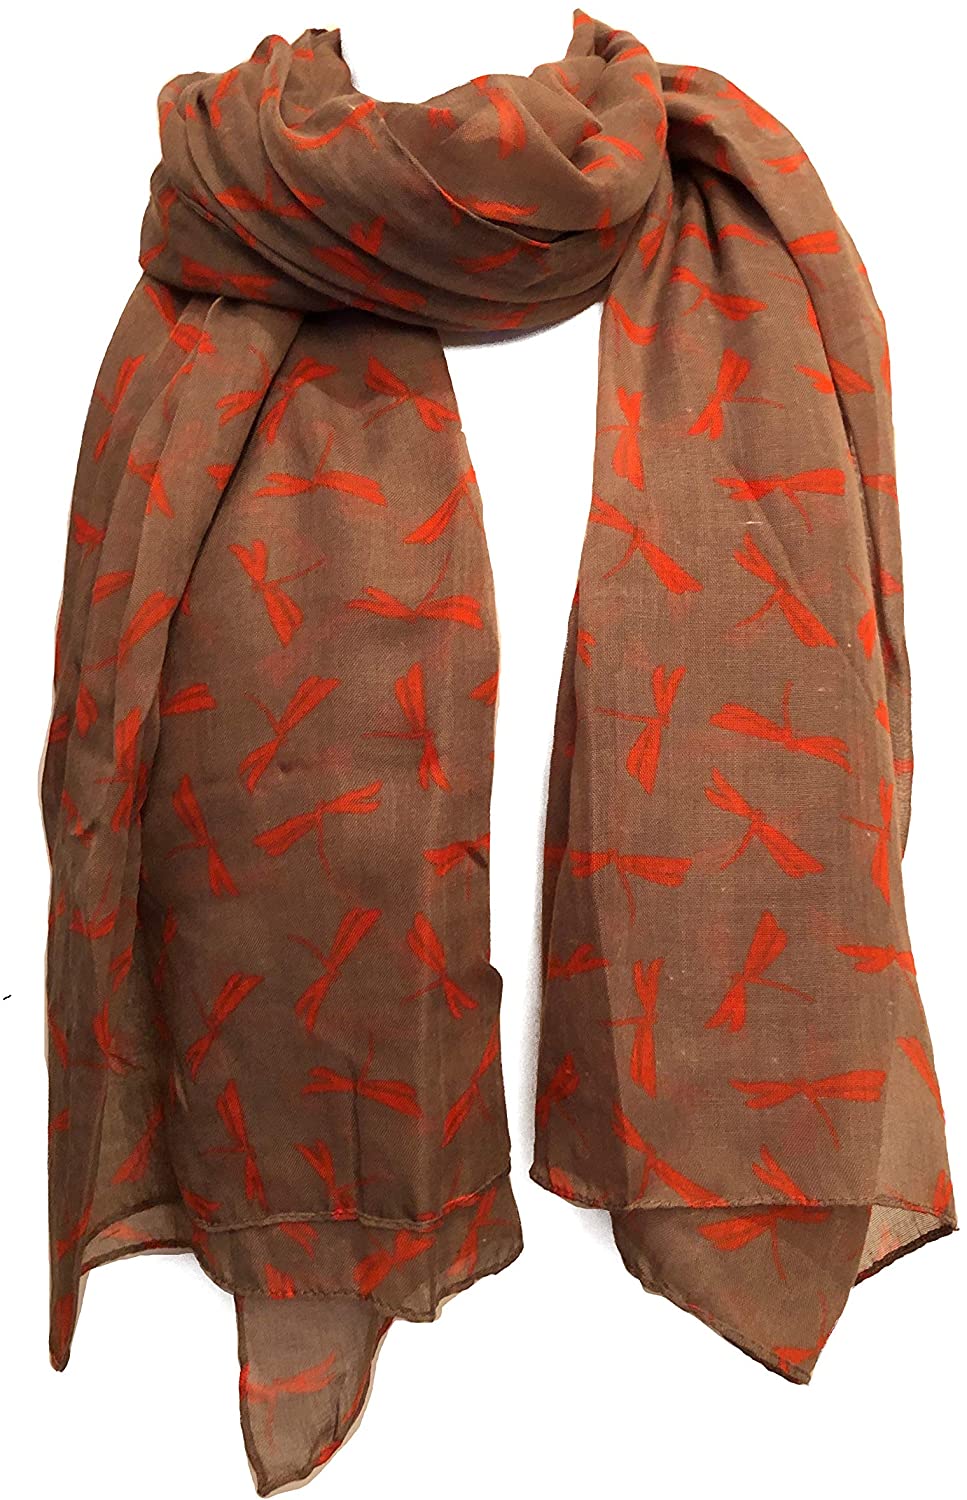 Pamper Yourself Now Ladies Scarf Brown with Orange Dragonfly Fashion Long Soft wrap/Sarong